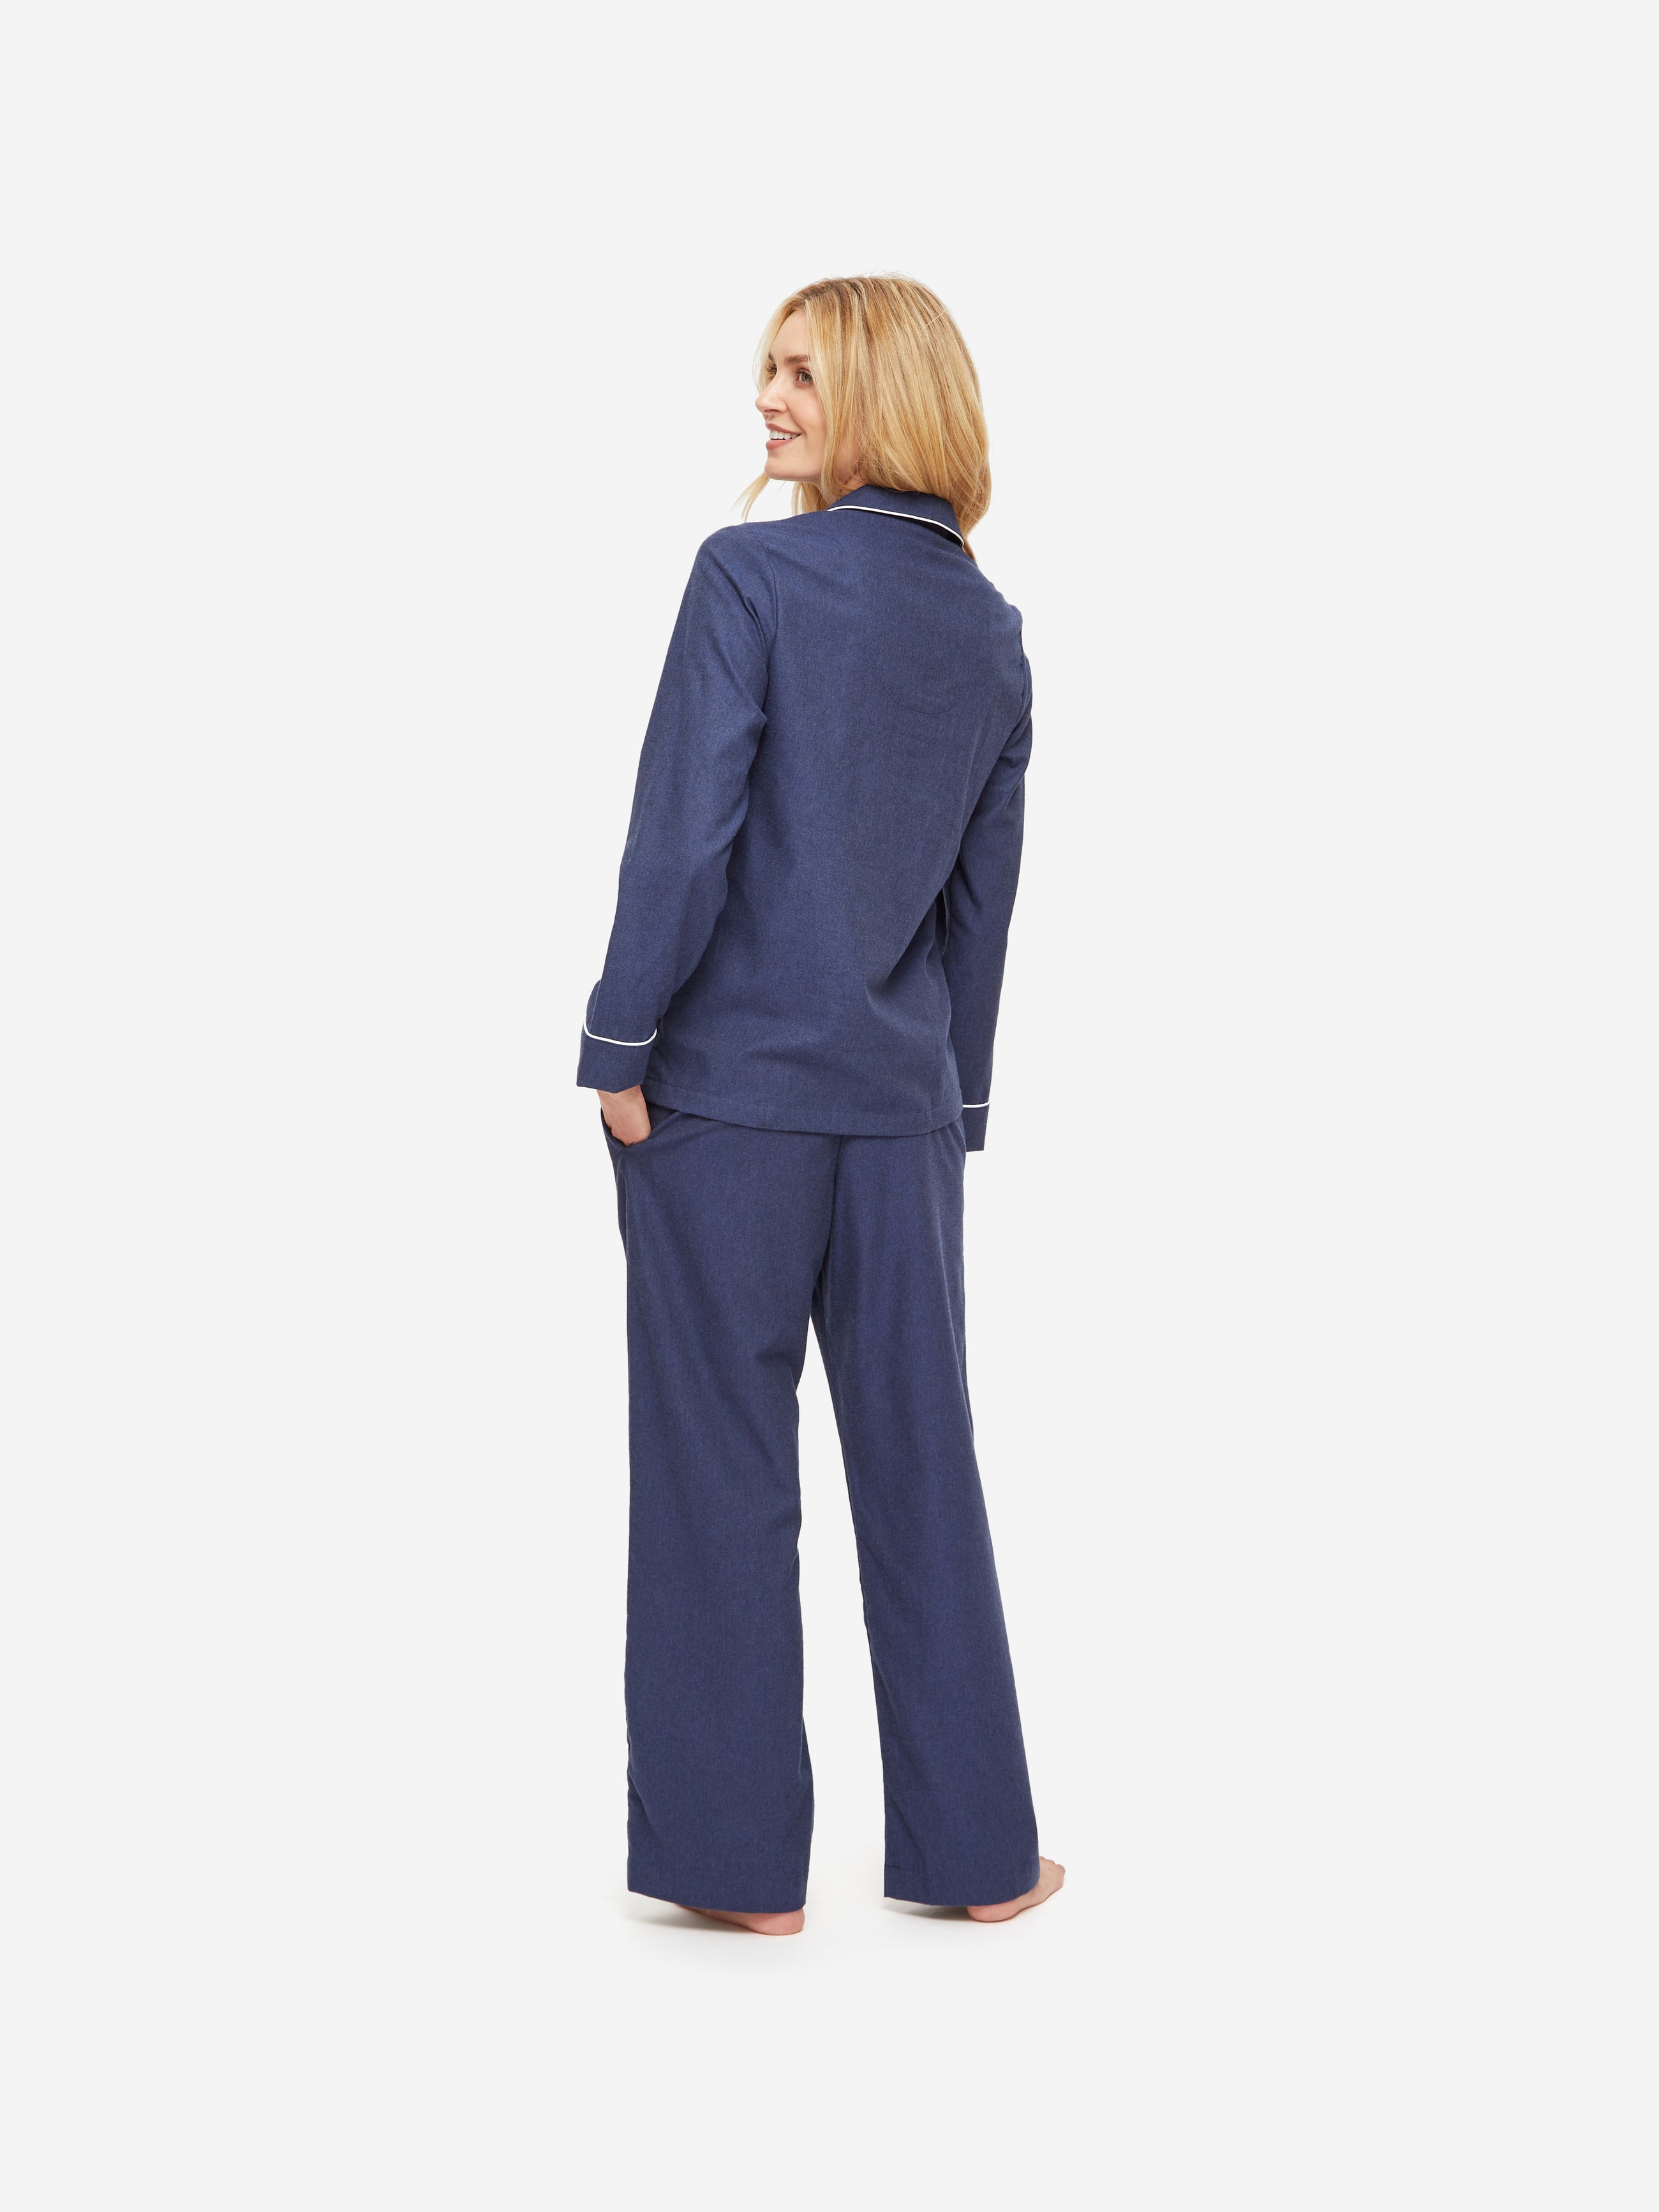 Women's Twill Pajama Set in White with Navy Piping